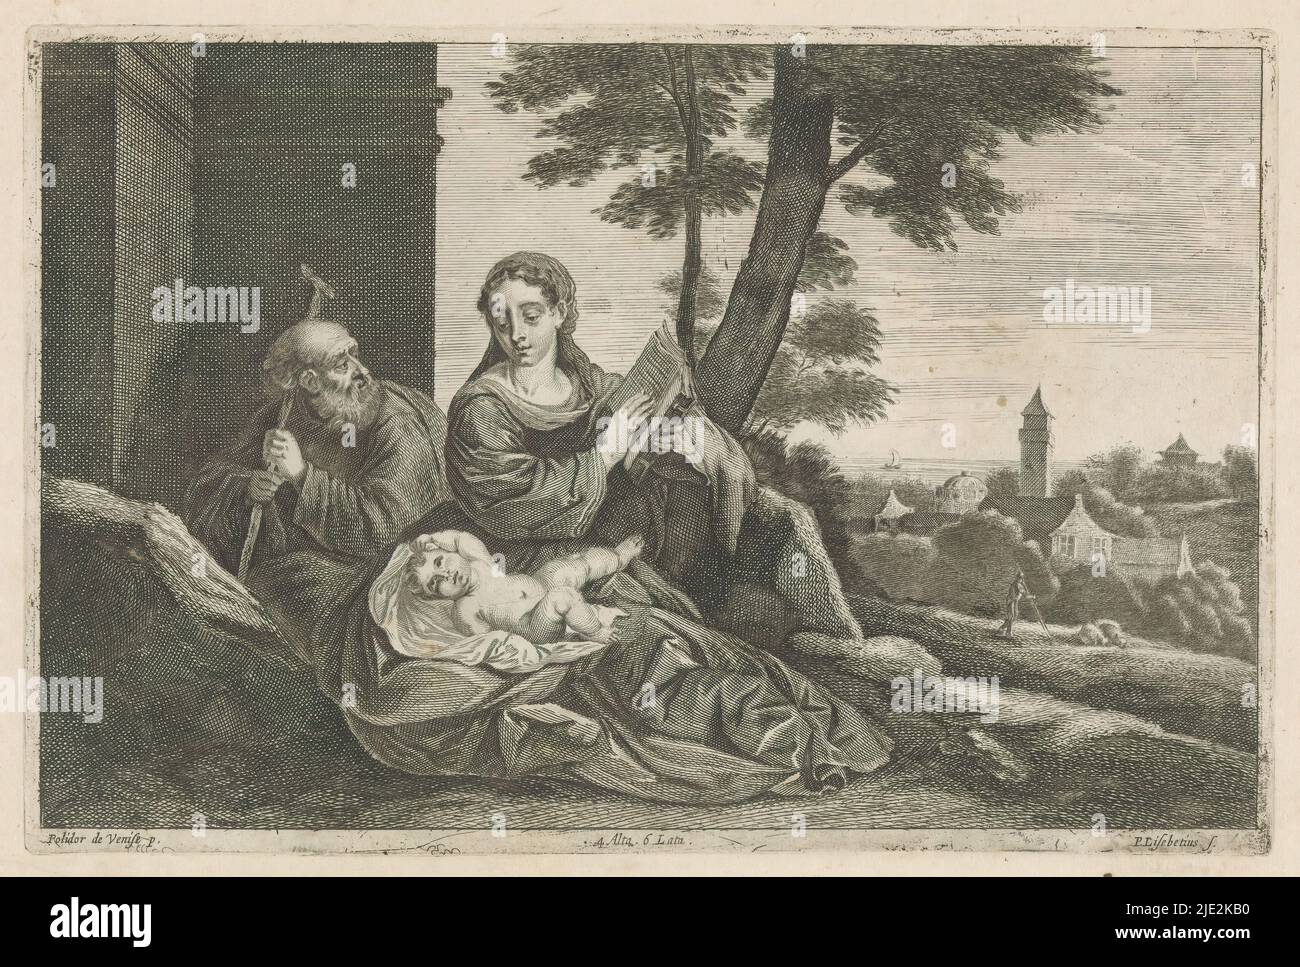 Holy Family in a landscape, Mary showing an open book to Joseph. The Christ child is lying on her lap. In the background a church in a waterfront landscape. This print is part of an album., print maker: Peter van Liesebetten, (mentioned on object), after painting by: Polidoro da Lanciano, (mentioned on object), publisher: David Teniers (II), print maker: Antwerp, after painting by: Venice, publisher: Brussels, 1660, paper, etching, engraving, height 203 mm × width 308 mm Stock Photo